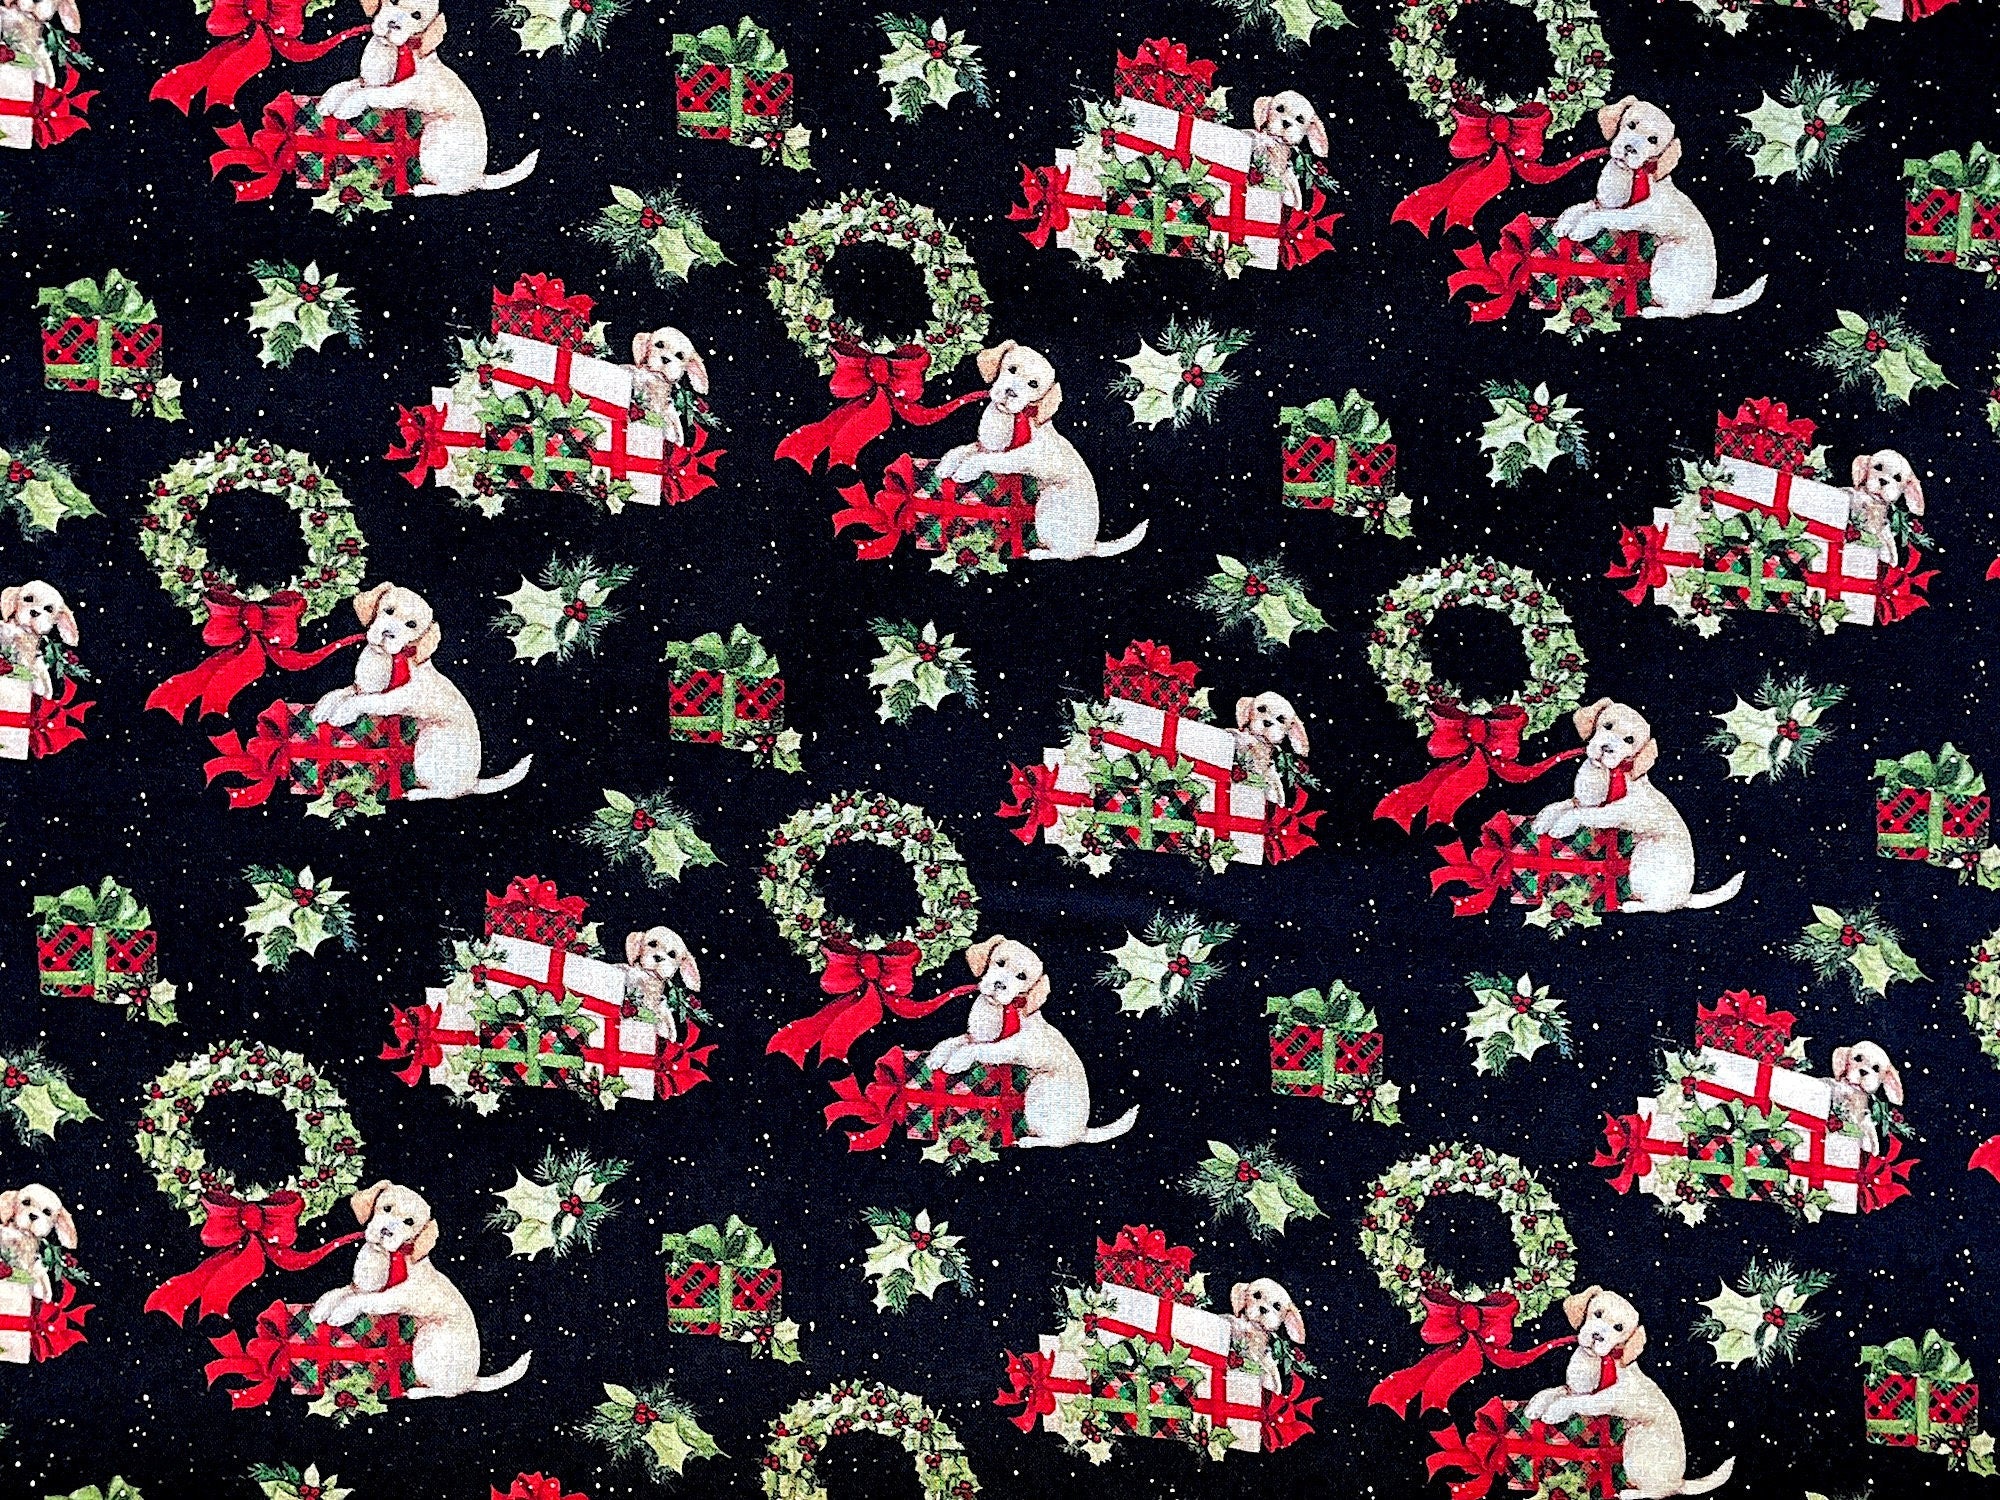 This Christmas themed fabric is covered with dogs, presents, wreaths and more. The dogs are either laying on the presents or have their paws on them just waiting to open them.